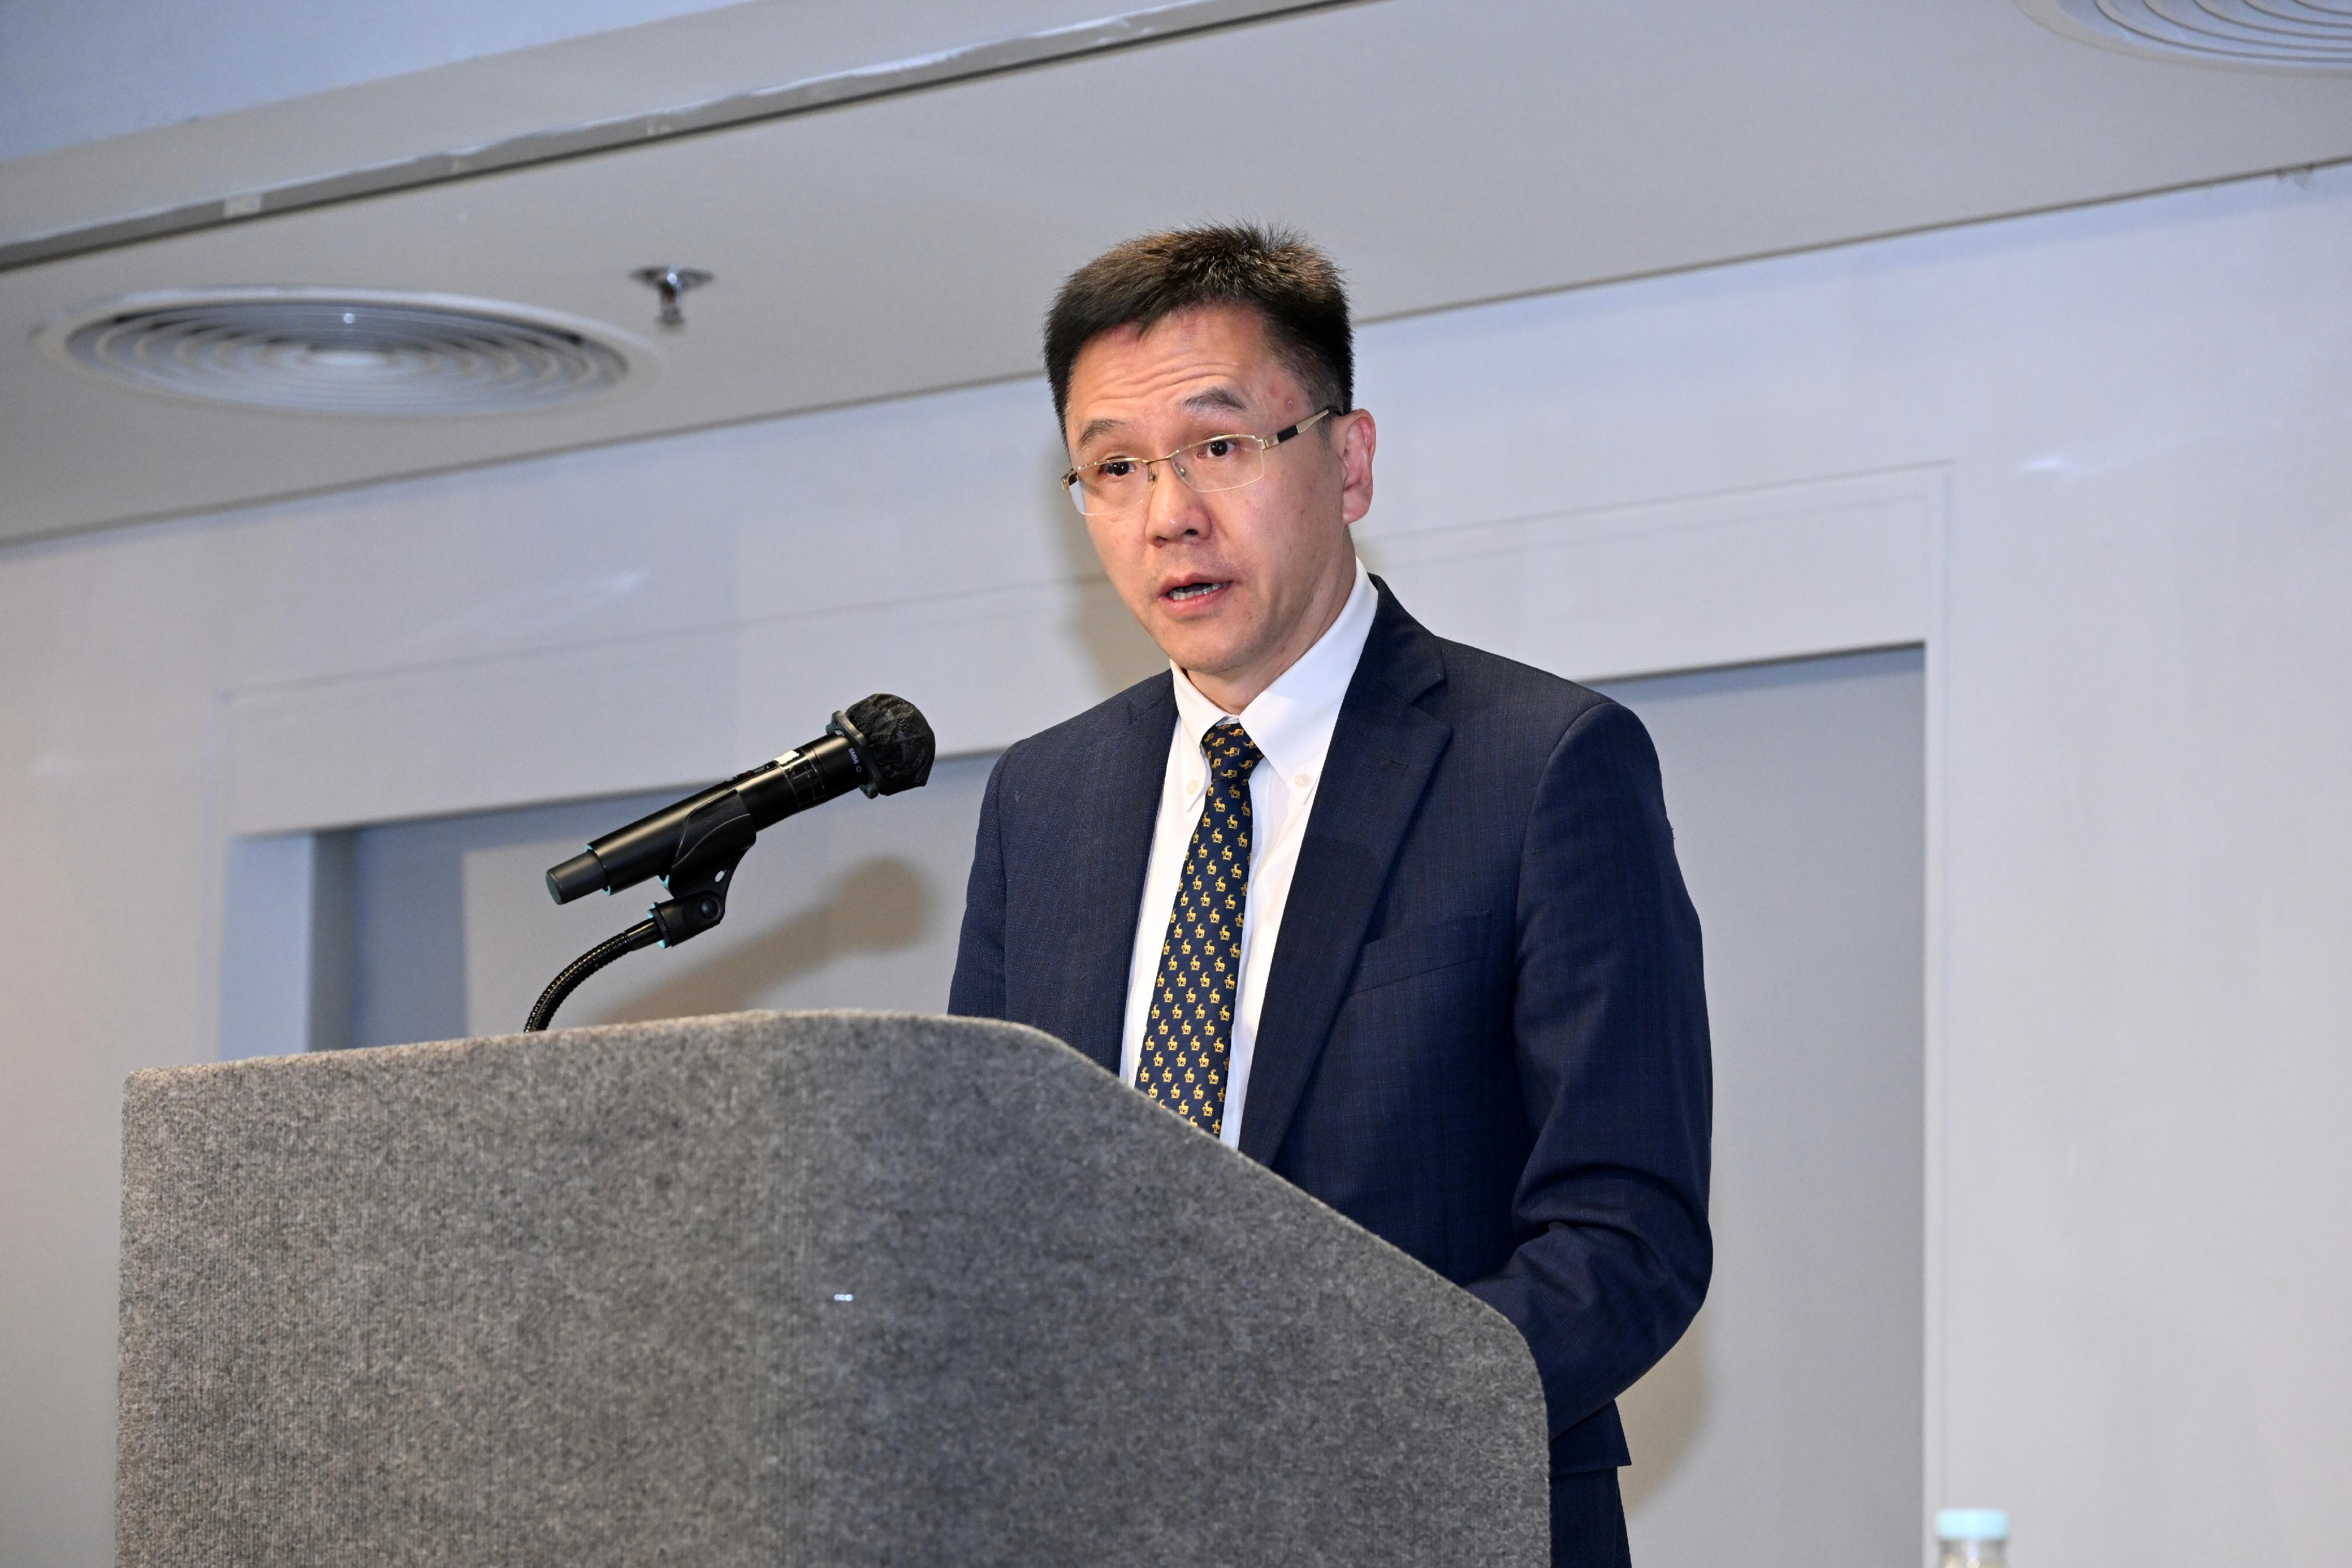 The Innovation and Technology Commission today (September 28) held a forum to announce to universities the official launch of the Research, Academic and Industry Sectors One-plus Scheme (RAISe+ Scheme) in mid-October this year. Photo shows the Secretary for Innovation, Technology and Industry, Professor Sun Dong, speaking at the forum.
